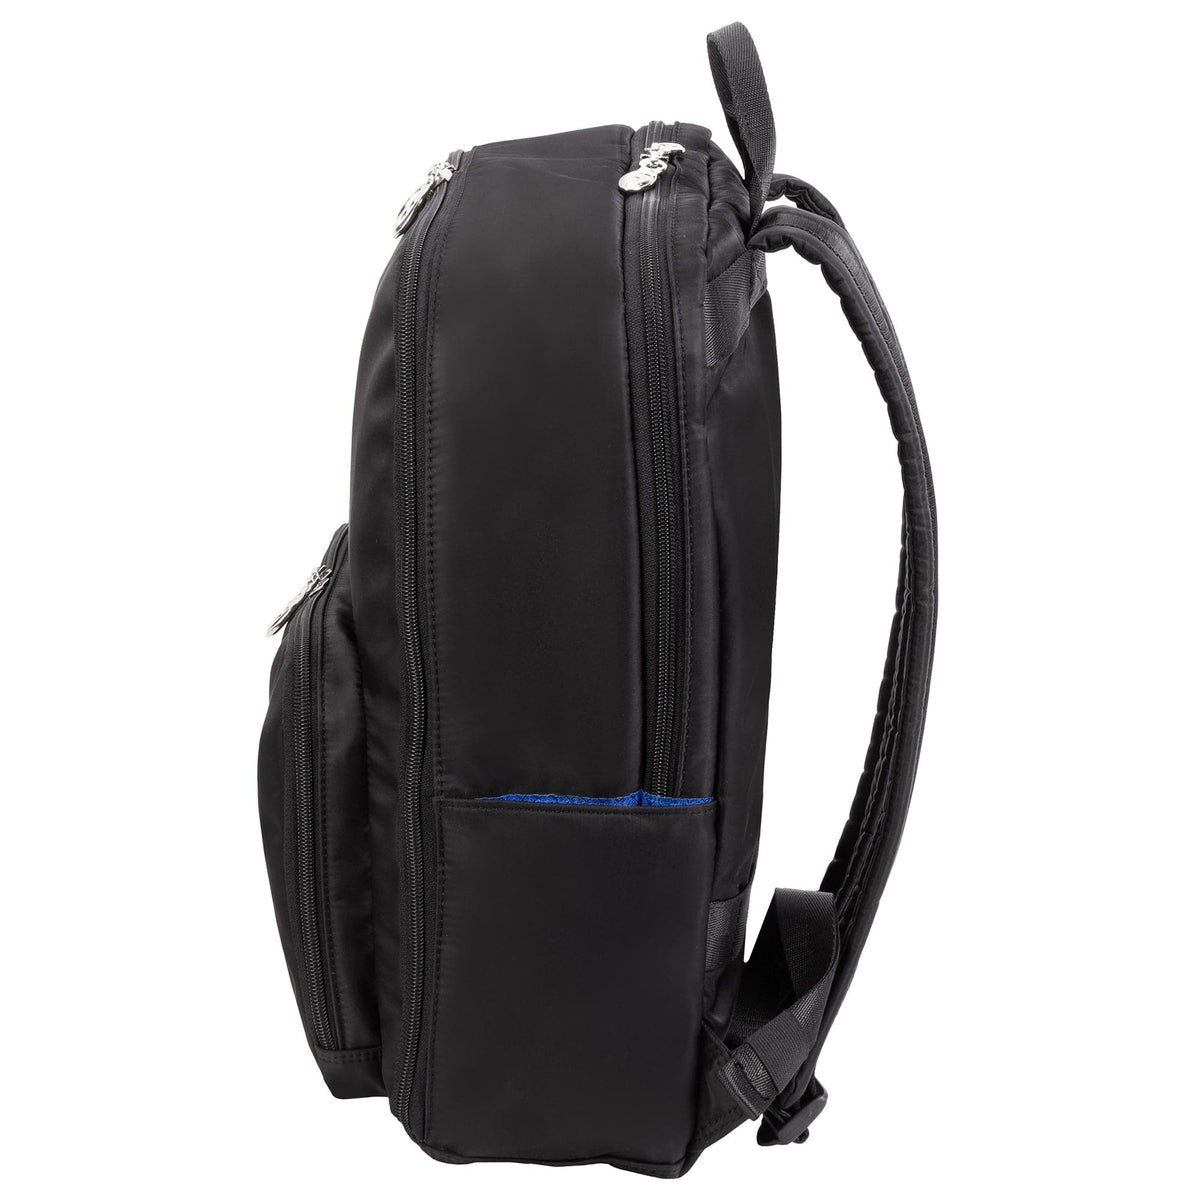 McKlein N Series Transporter 15" Dual-Compartment Laptop and Tablet Nylon Backpack